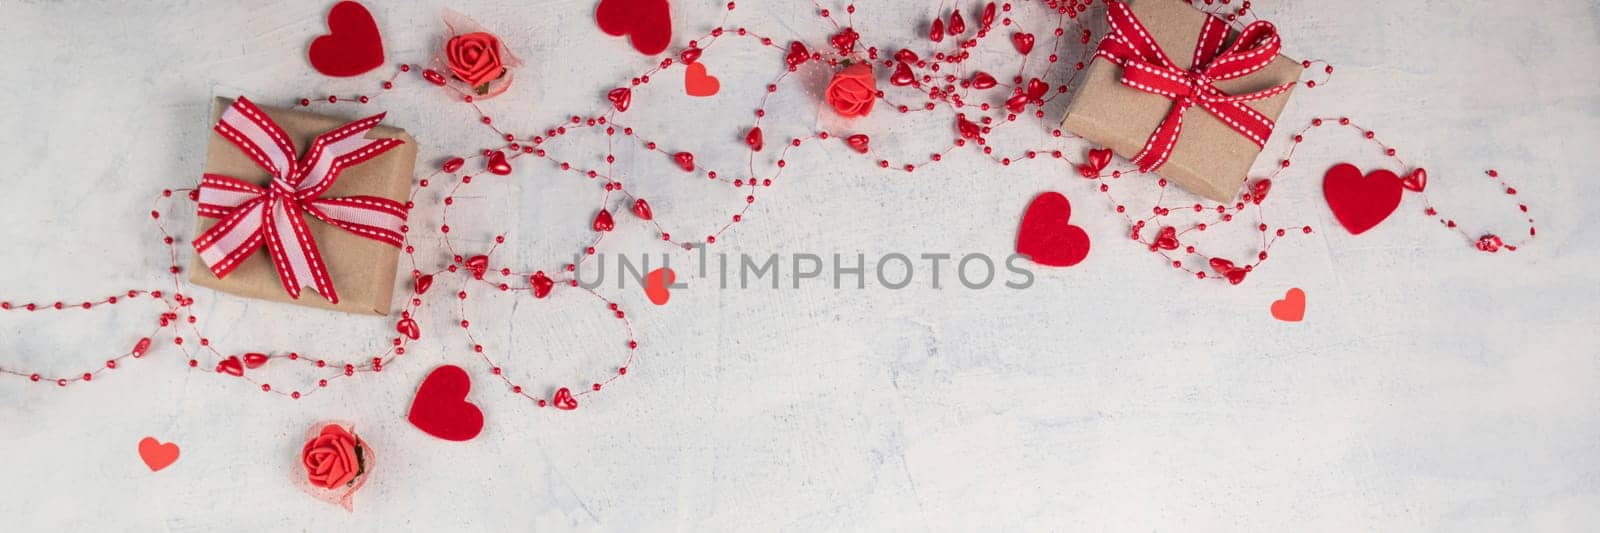 banner of two gifts with red ribbon on white textured background with red beads with hearts. background for valentine's day with space for your text. Soft focus. flat lay